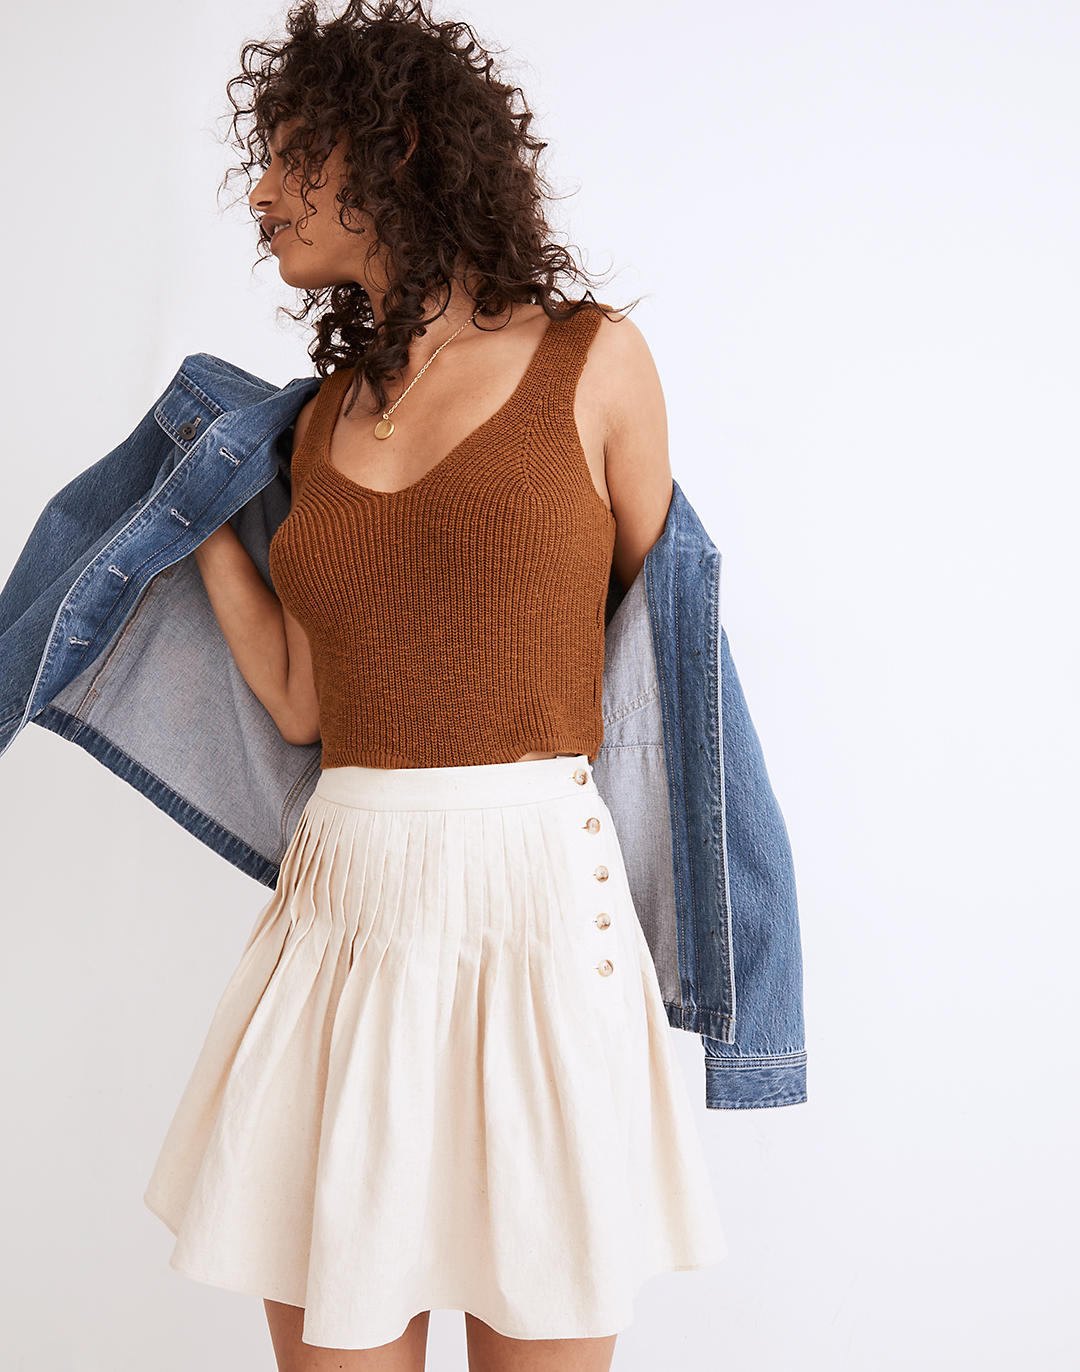 The Best Stores Like Brandy Melville: Madewell